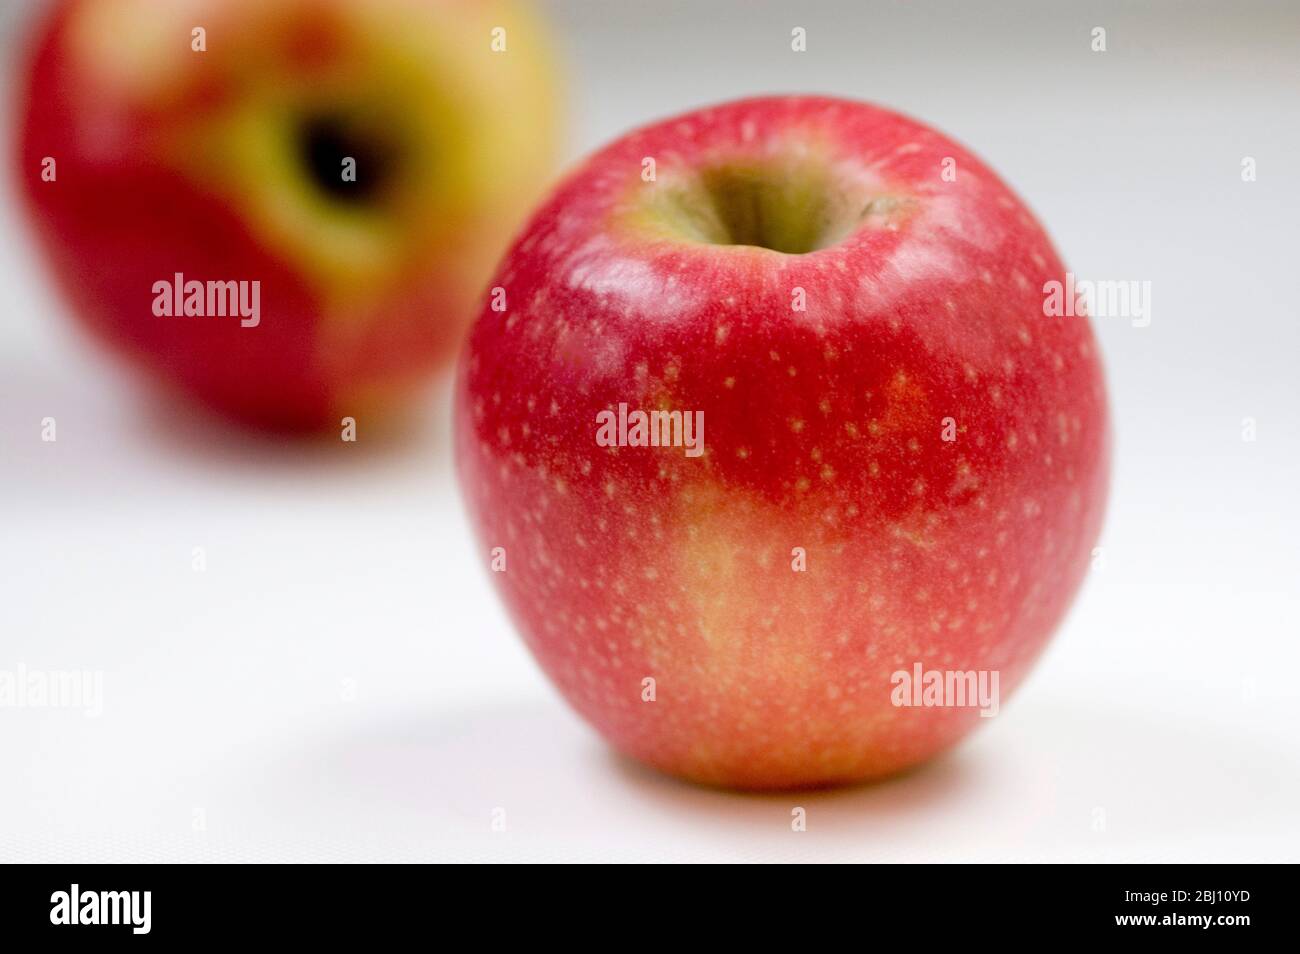 Two shiny red eating apples - Stock Photo